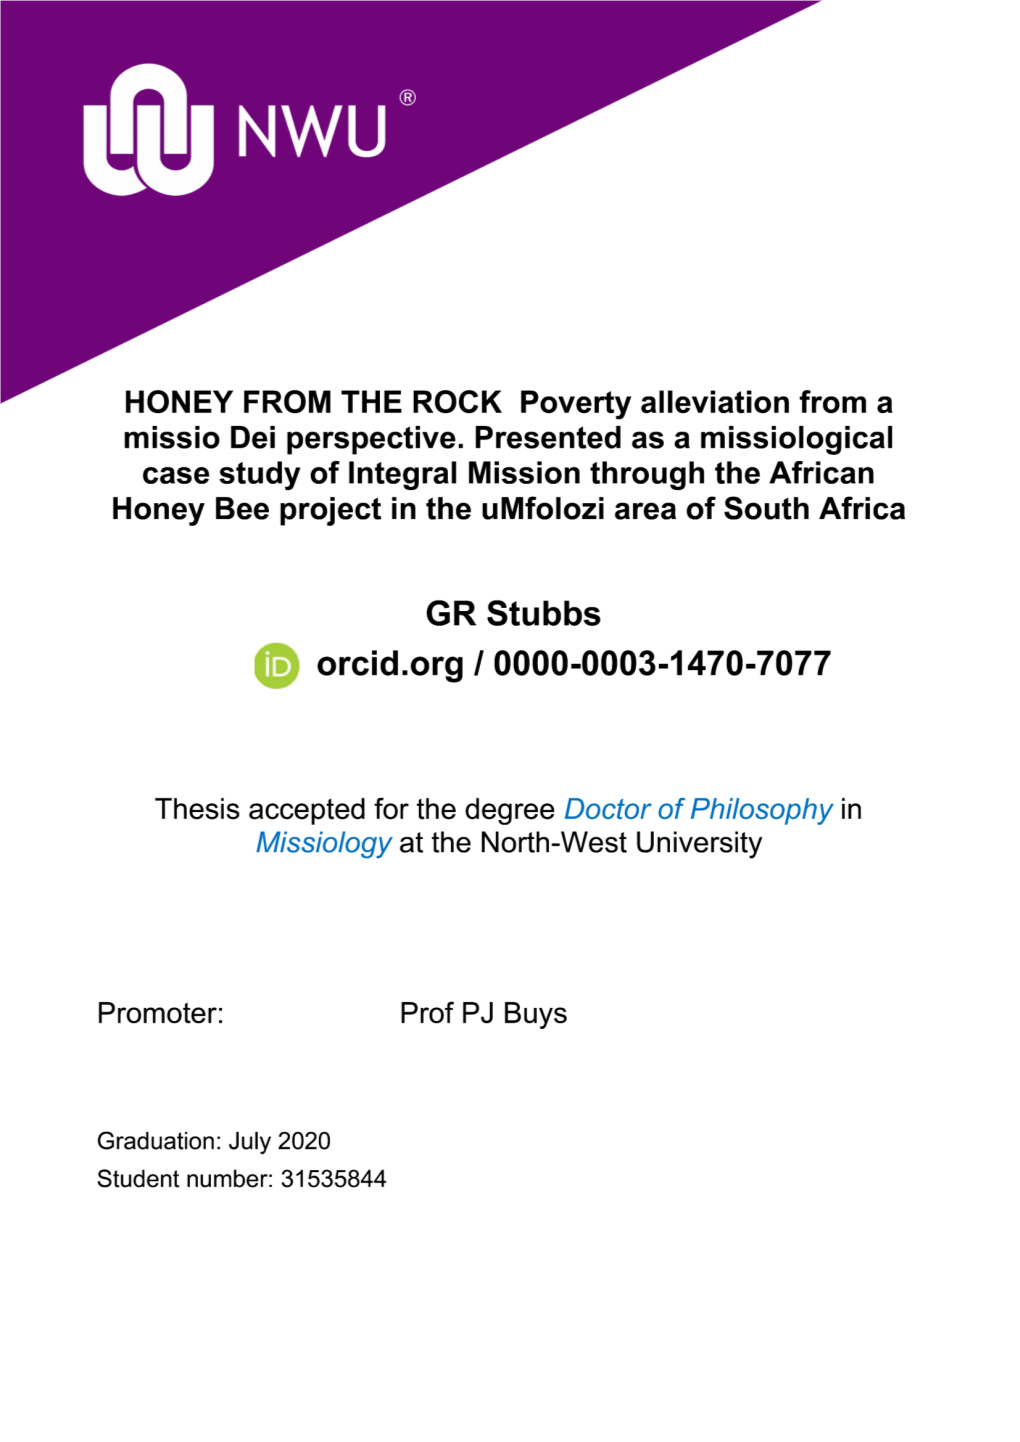 HONEY from the ROCK Poverty Alleviation from a Missio Dei